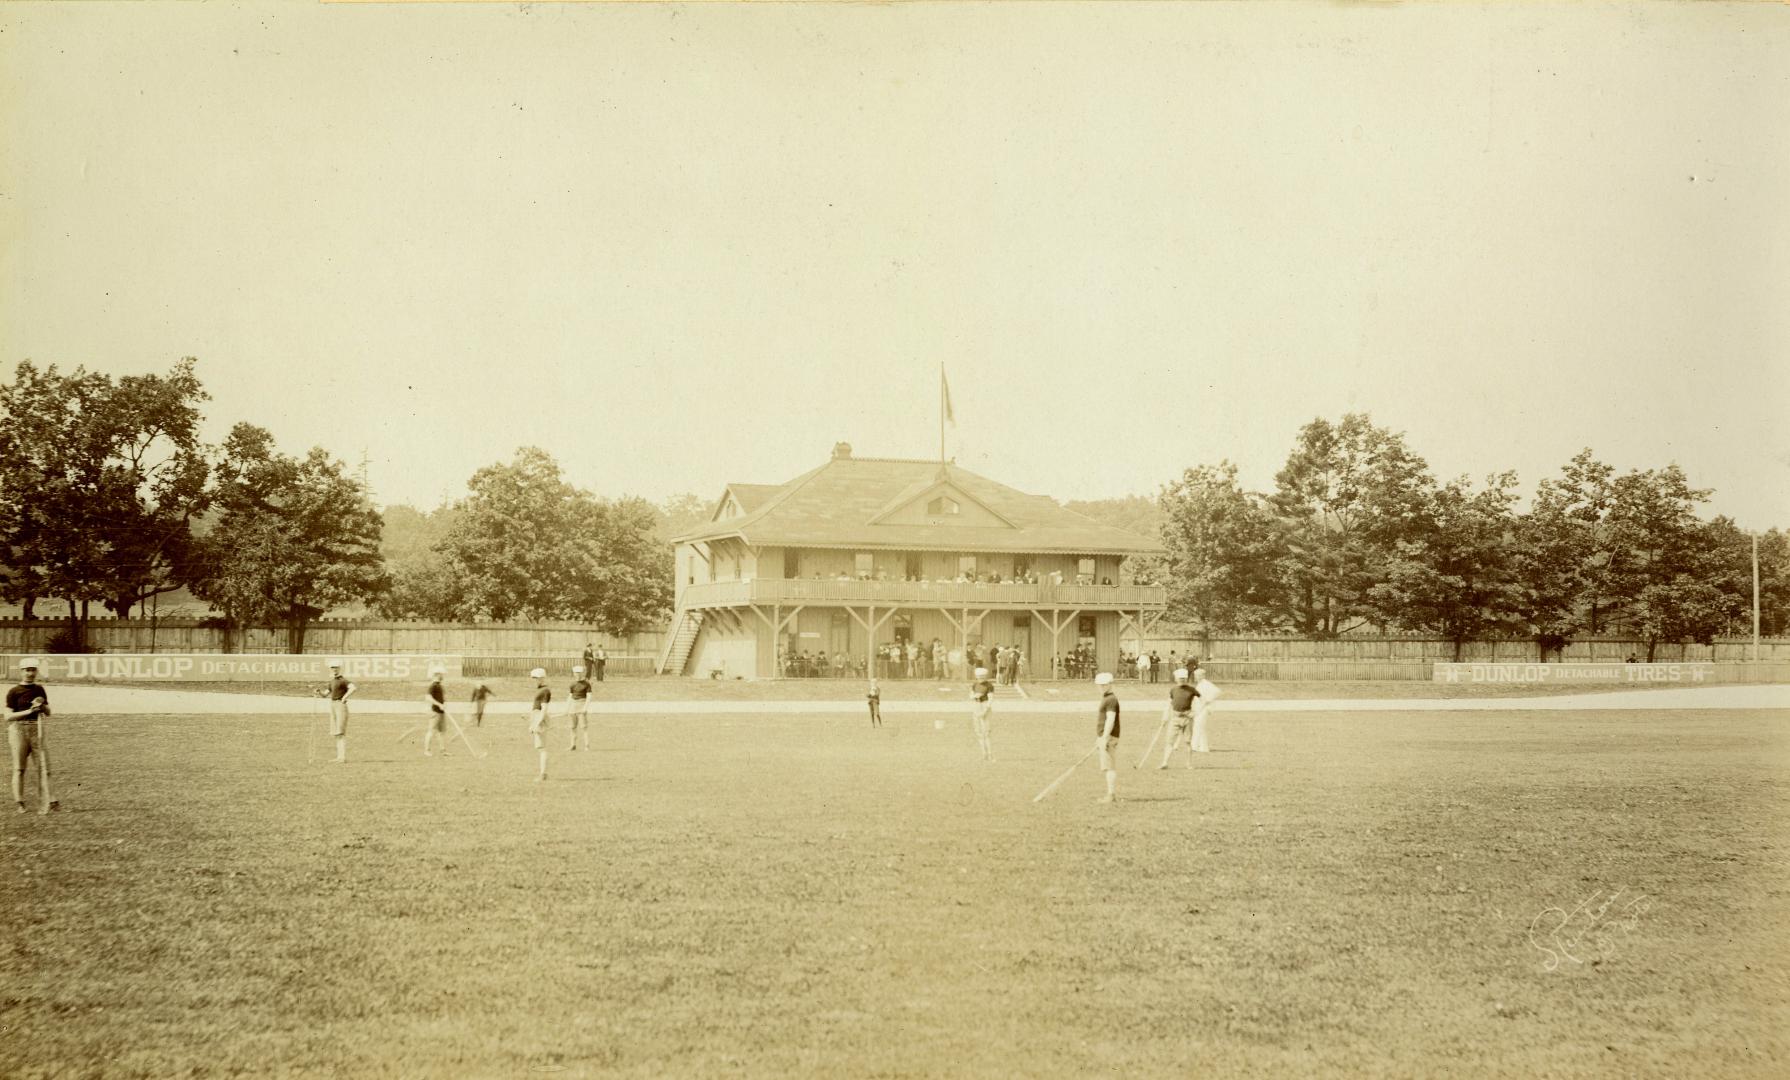 Image shows a club members on the lawn playing. There is a club building in the background.